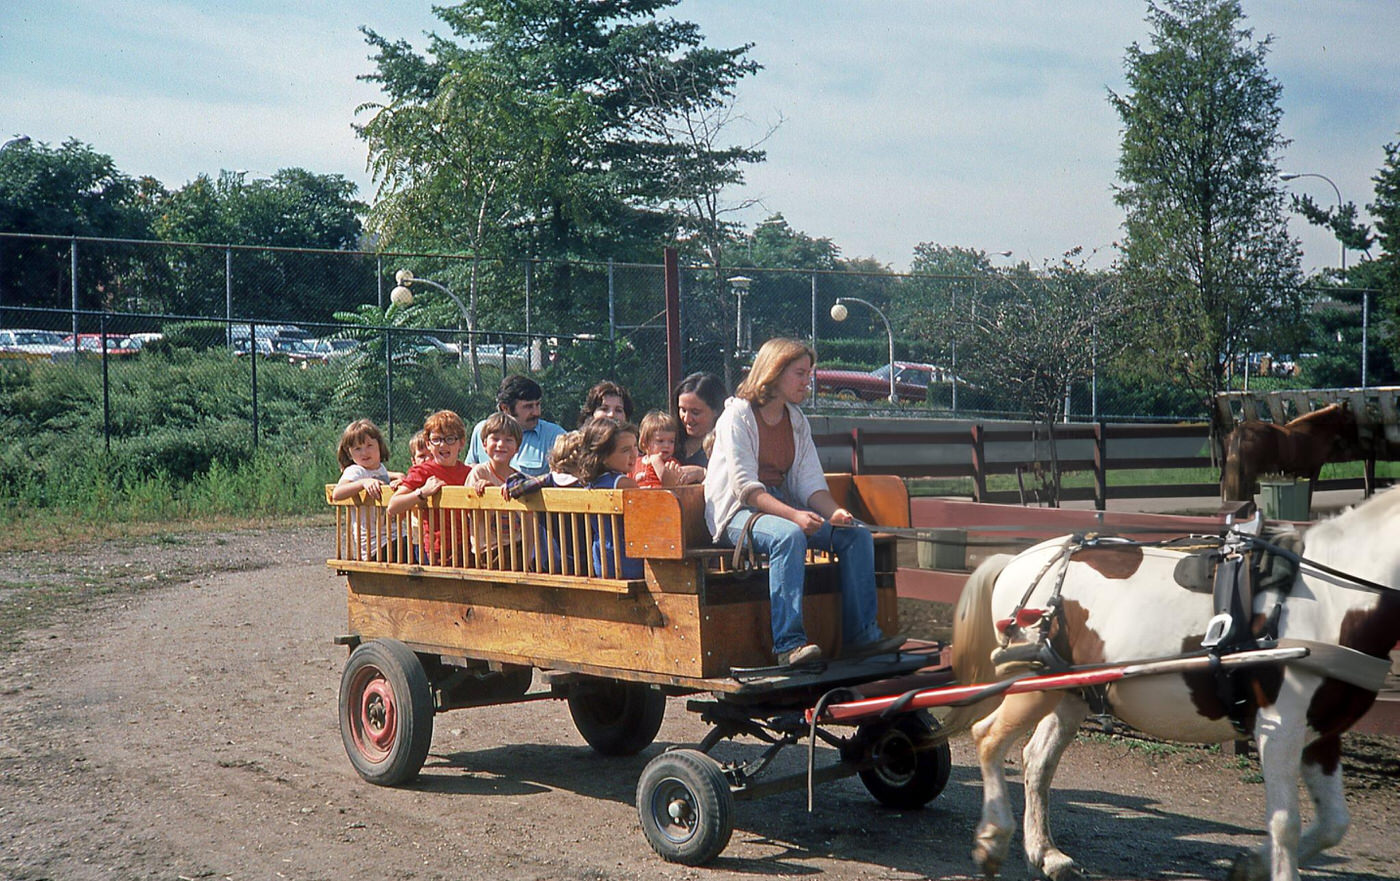 A Young Woman Steers A Horse-Drawn Wagon At The Queens Zoo In Flushing Meadows Park, Queens, 1978.